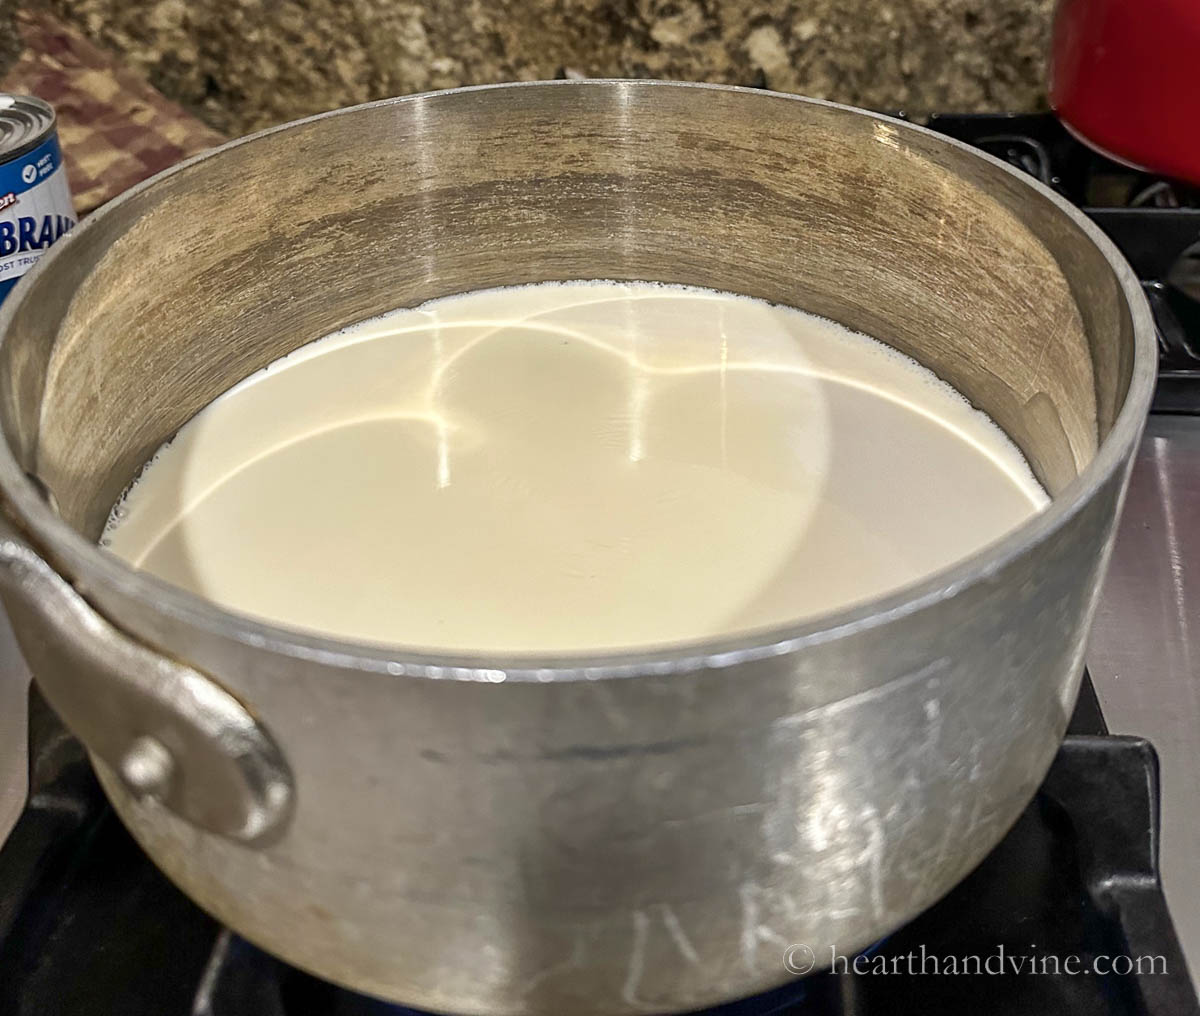 Heating evaporated milk on the stove.